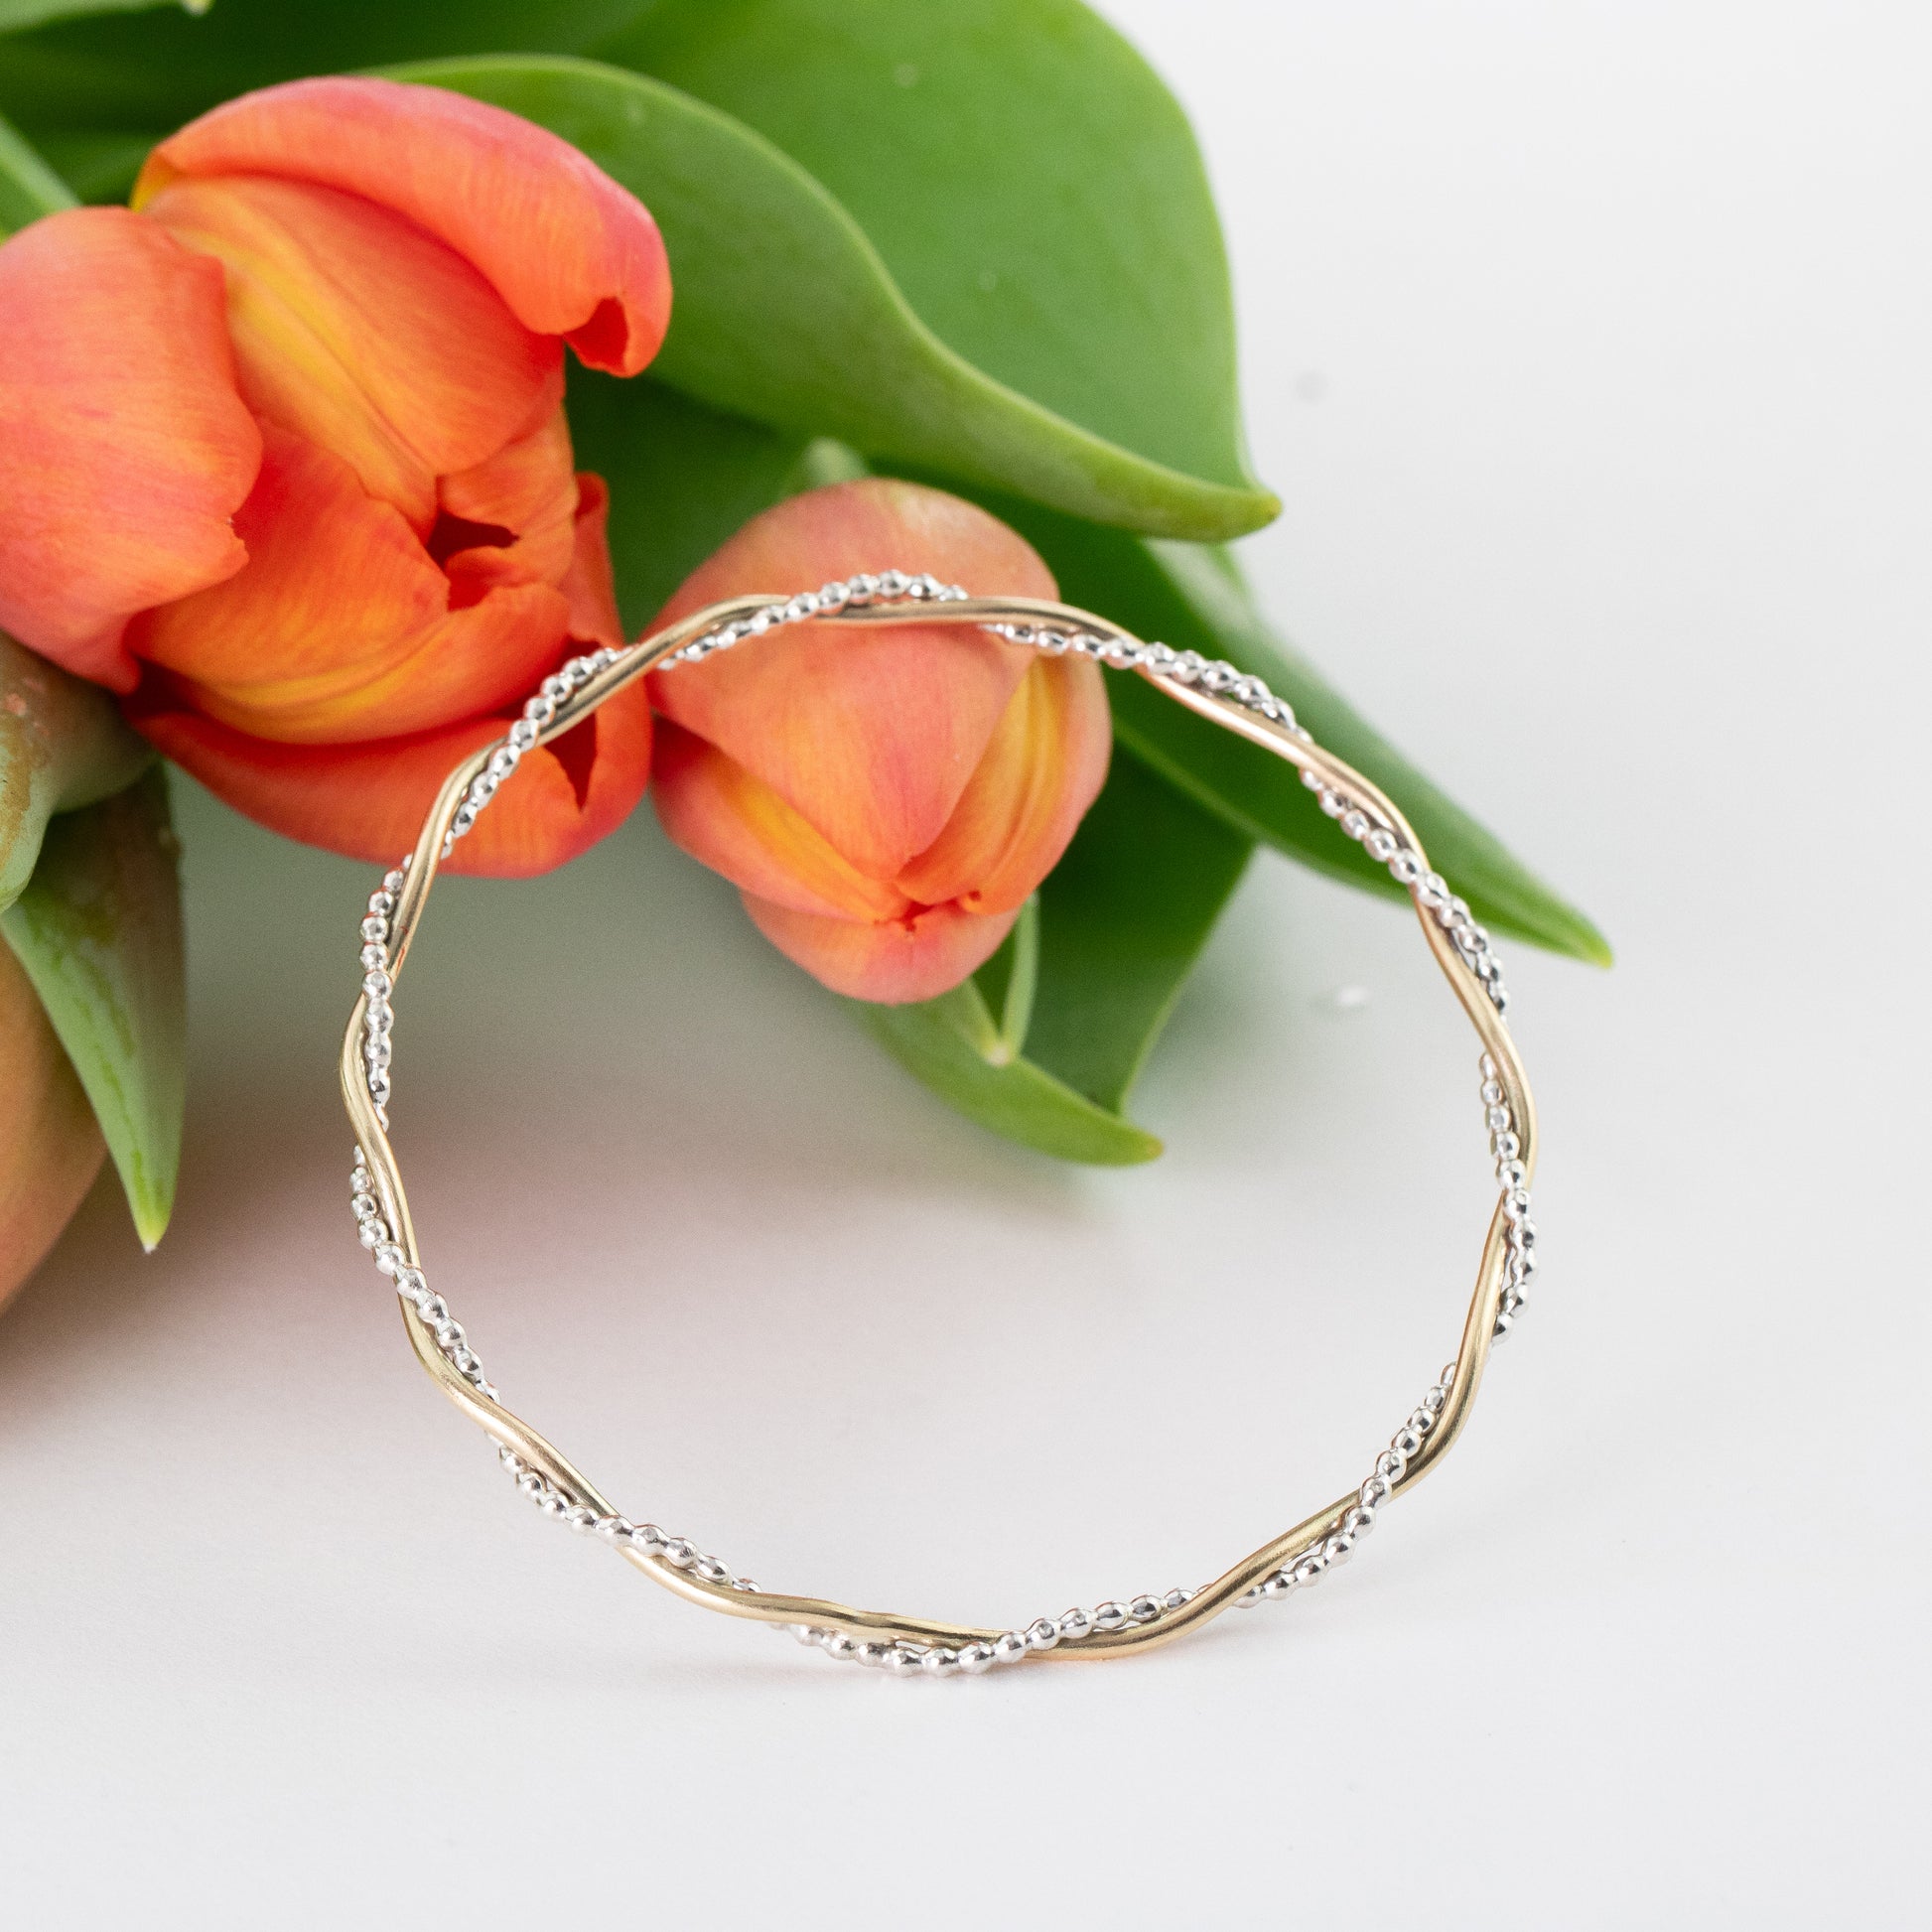 Mother & Daughter Jewellery - Entwined Bangle - Silver & 9kt Gold